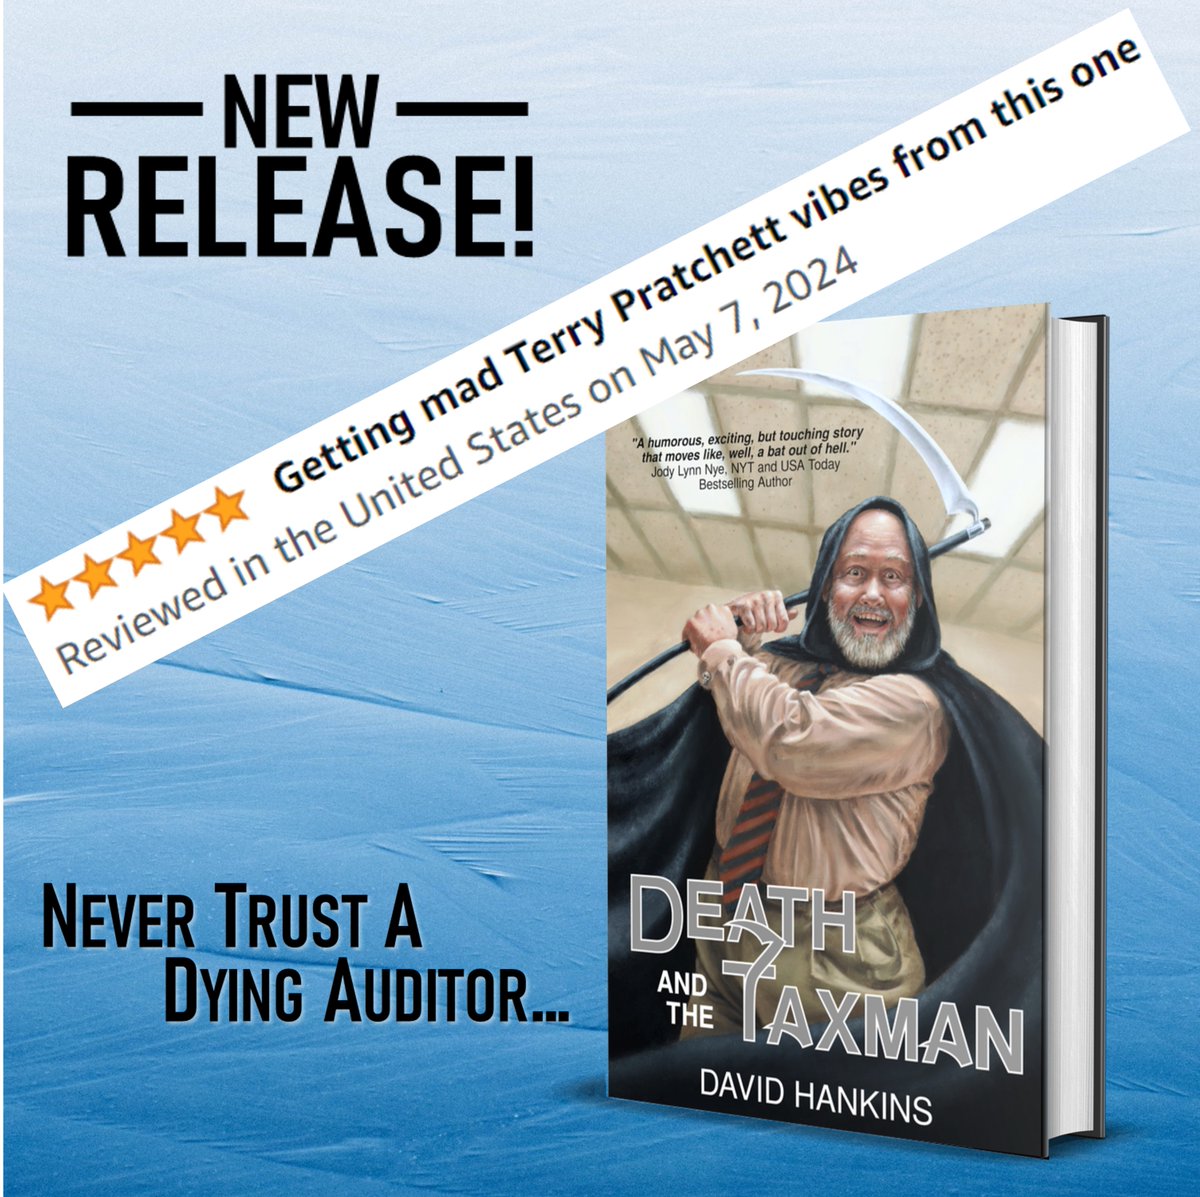 'Getting mad Terry Pratchett vibes from this one!' - Now THAT's high praise! Another 5-Star review for the hilarious new release Death and the Taxman.

Get your copy today.
books2read.com/deathandthetax…

#deathandthetaxman #terrypratchett #newrelease #writingcommunity #readingcommunity